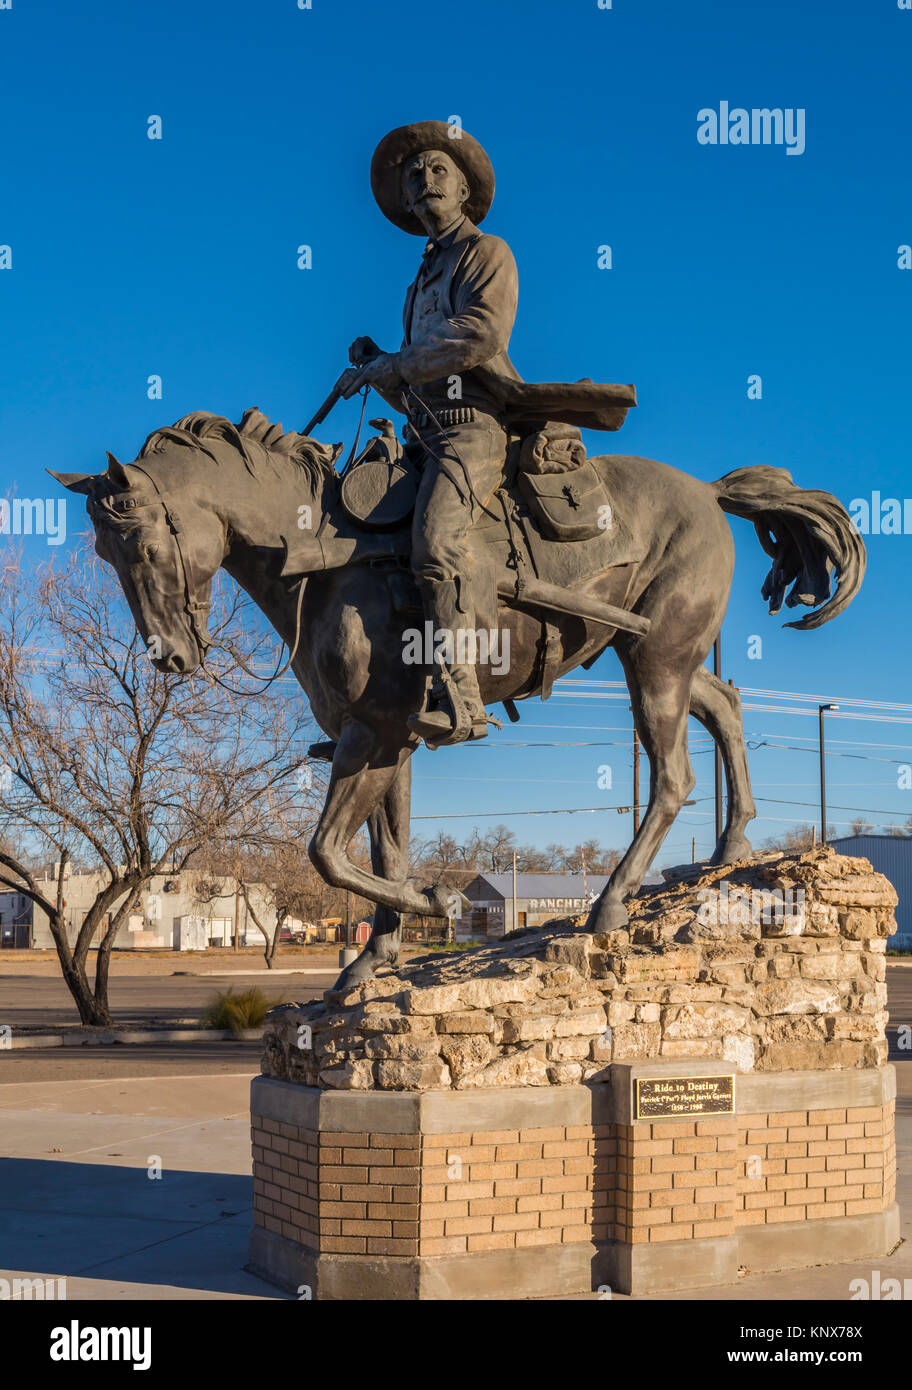 Pat Garrett statue by sculptor Robert Summers of old west sheriff famous for shooting outlaw Billy the Kid.  Statue located in Roswell, New Mexico. Stock Photo